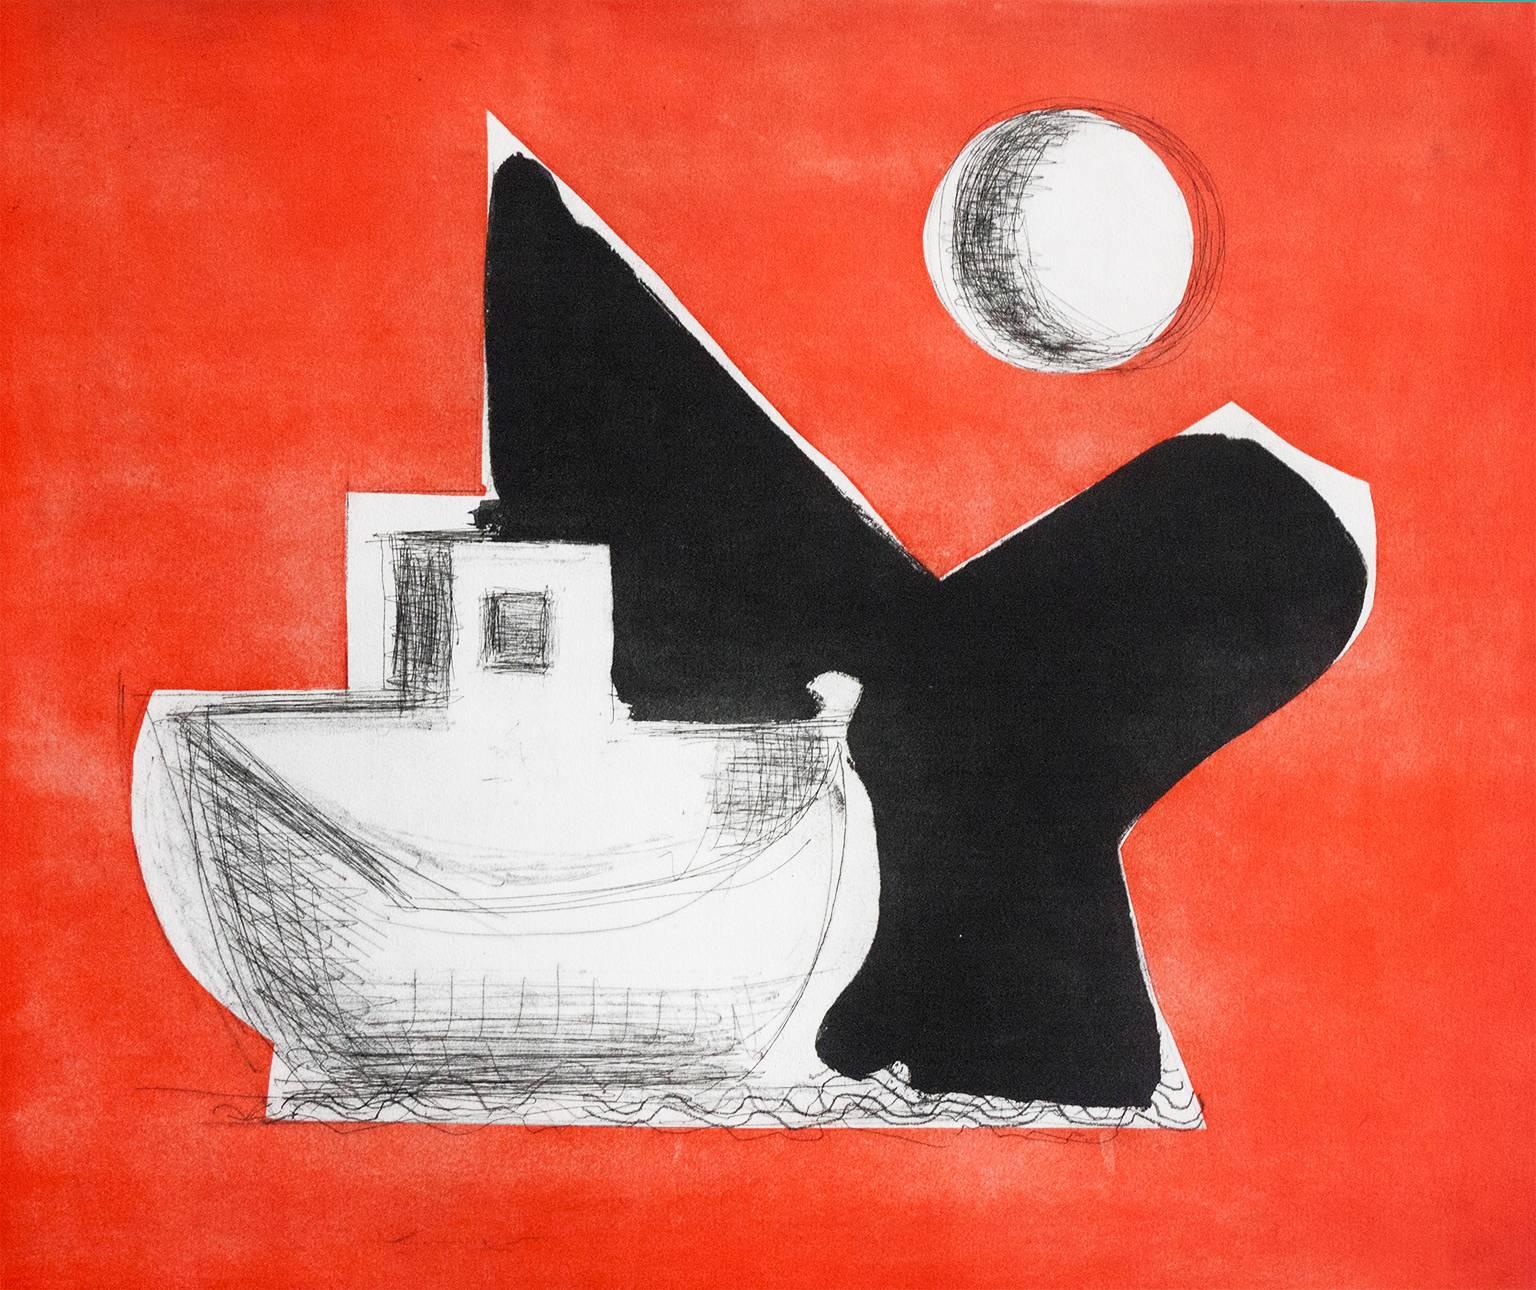 Paul Resika Landscape Print – "Red And Black", abstract seascape etching, aquatint print, Cape Cod.